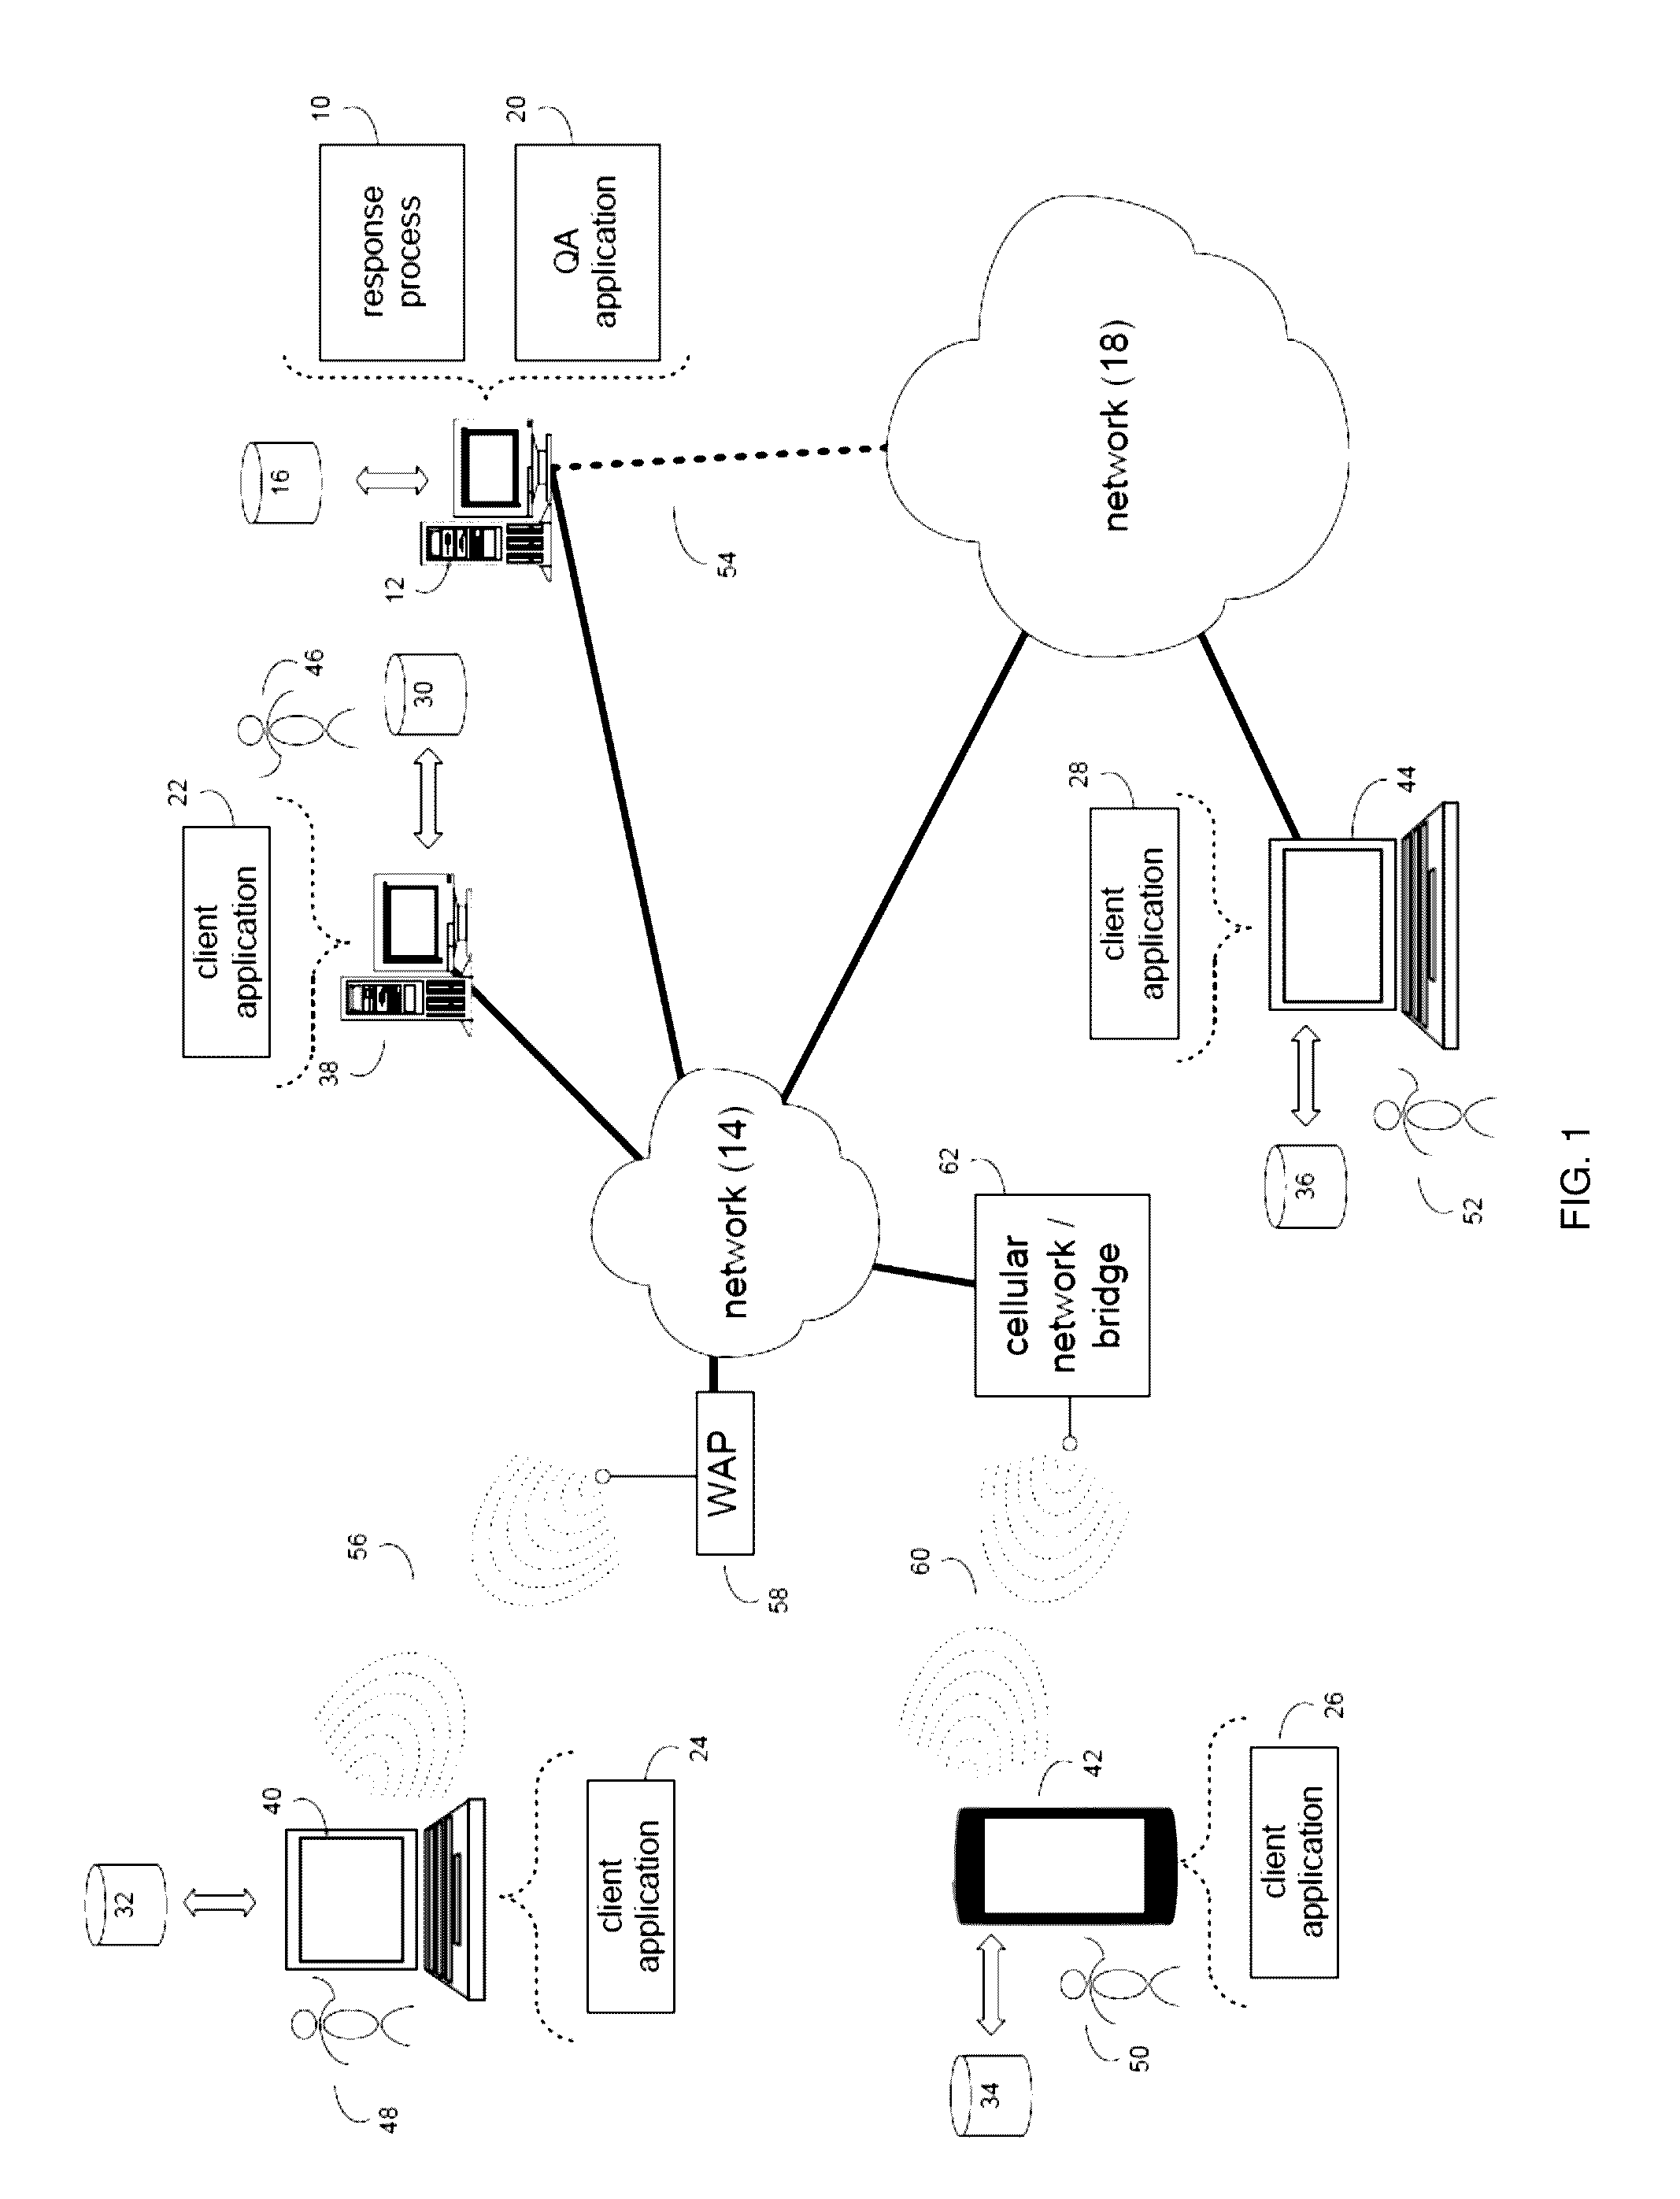 System and method for defining and using different levels of ground truth